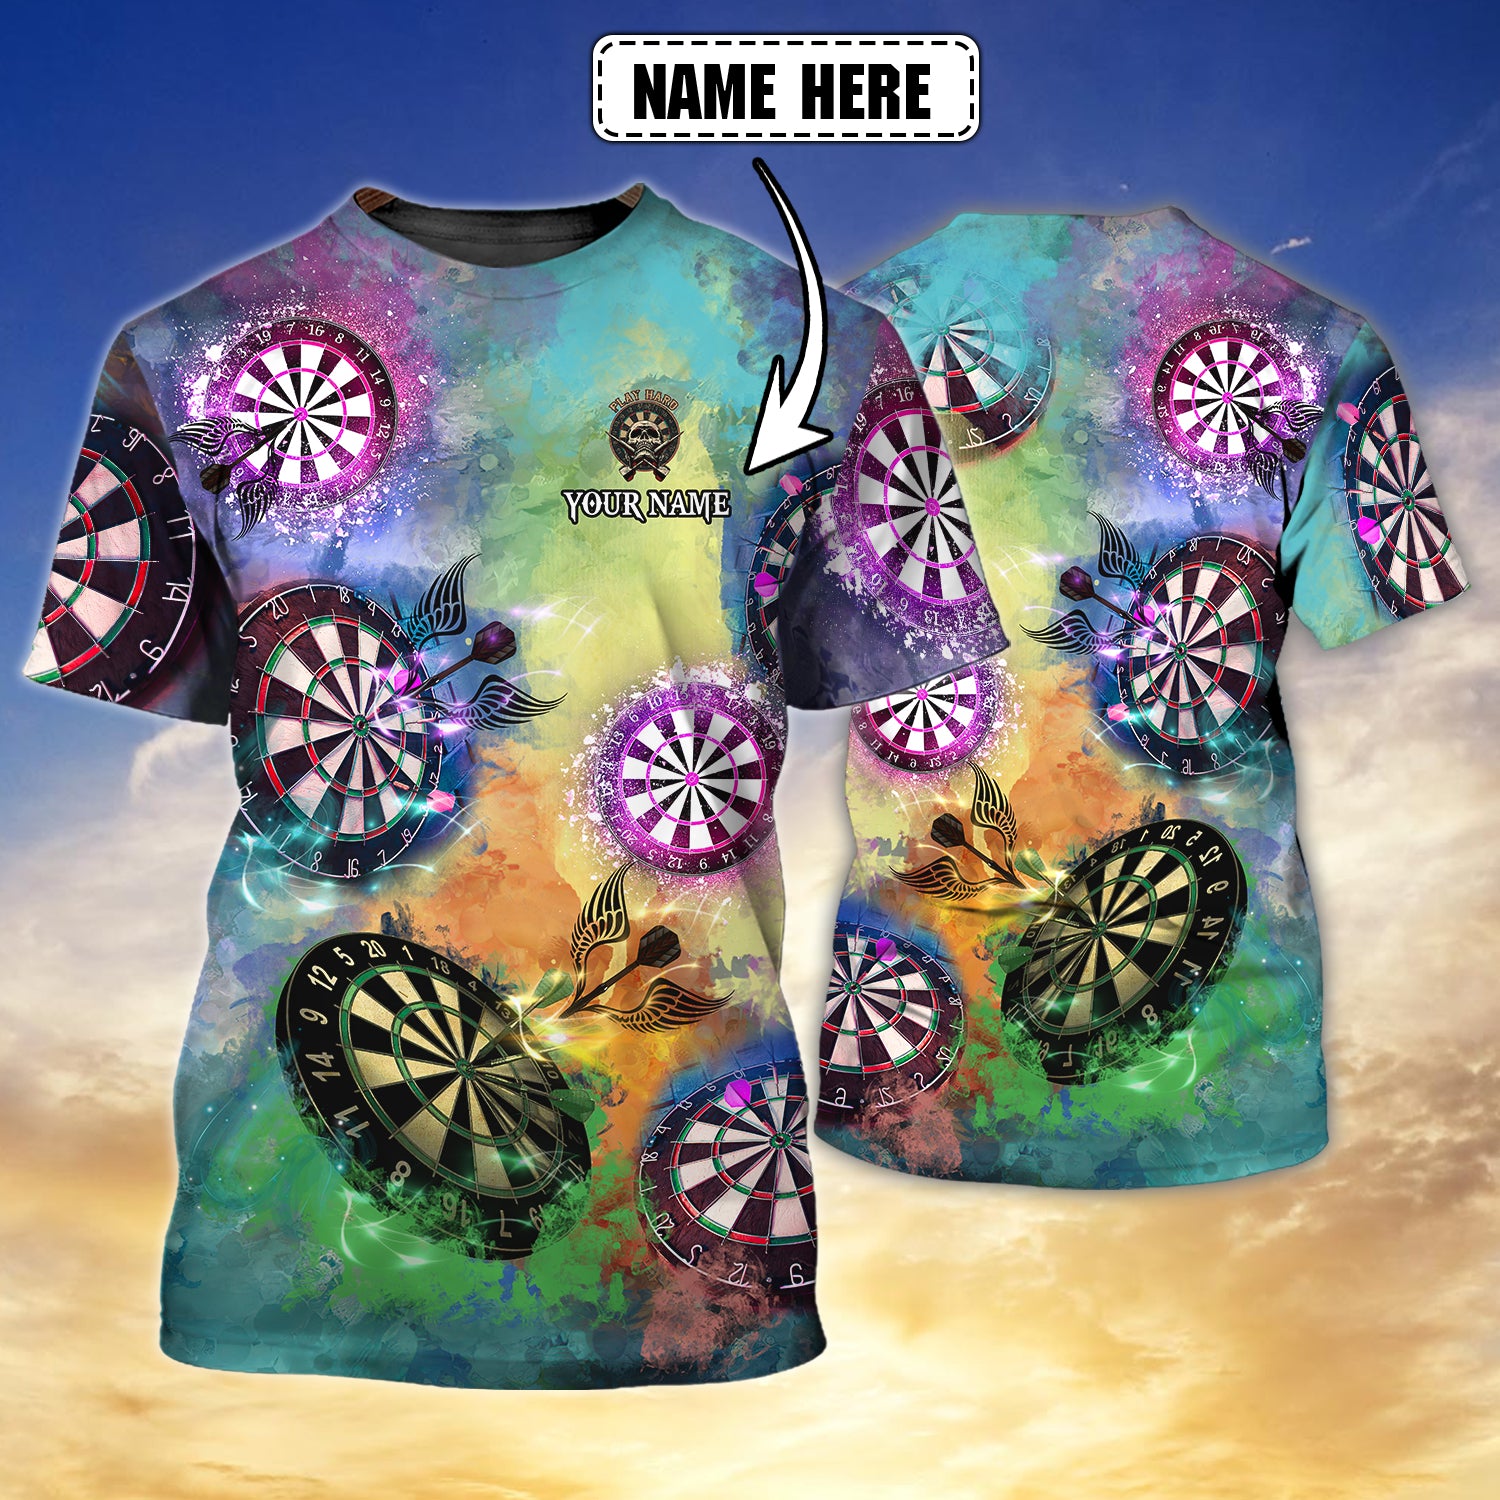 Darts2 - Personalized Name 3D T Shirt - Hdmt